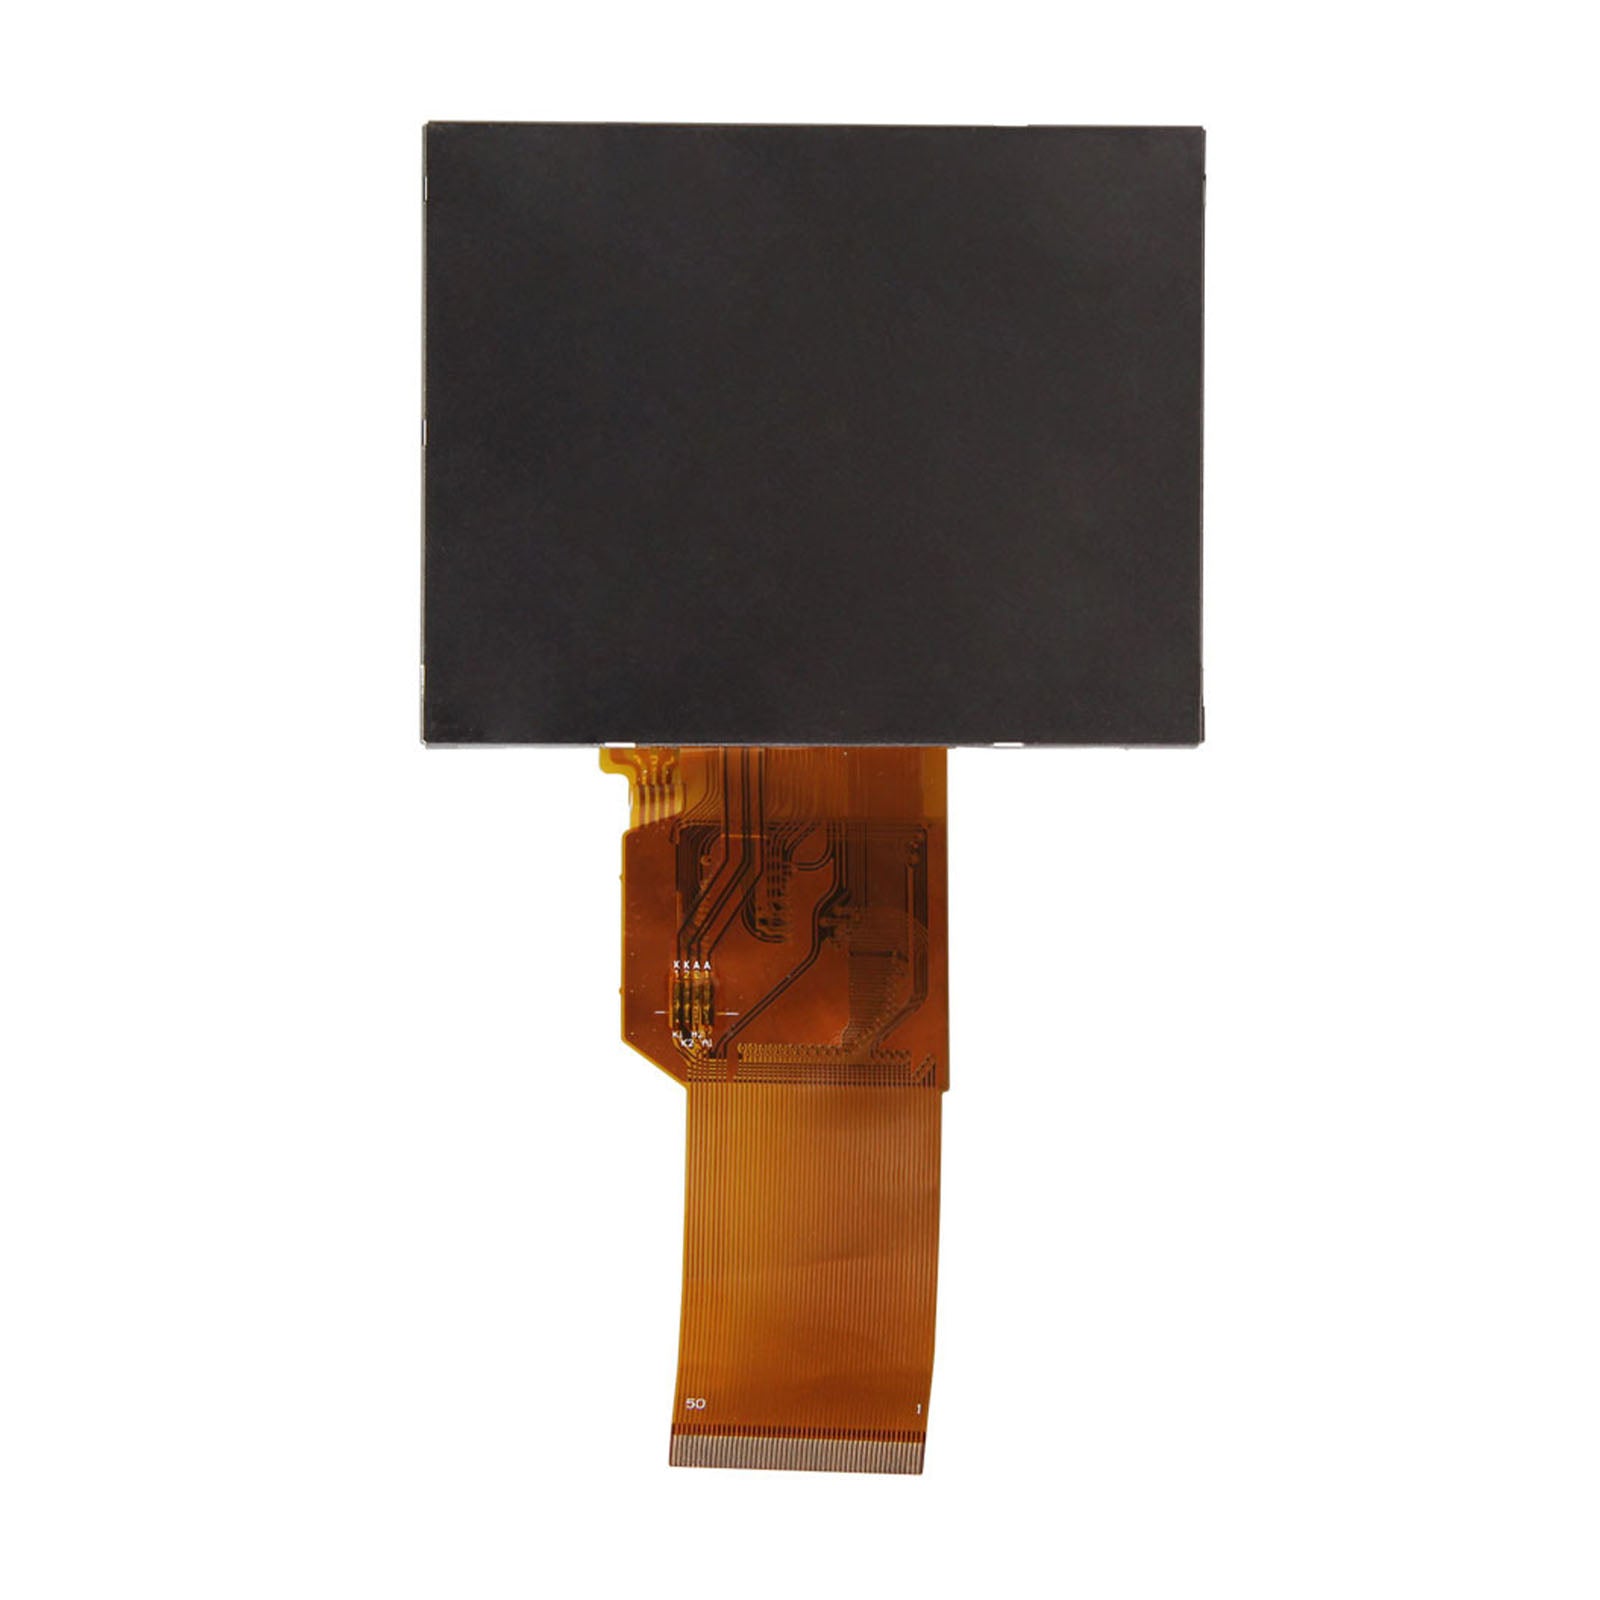 DisplayModule 3.5" 320x240 TFT LCD Display Panel (SSD2119) With Resistive Touch - SPI, MCU, RGB